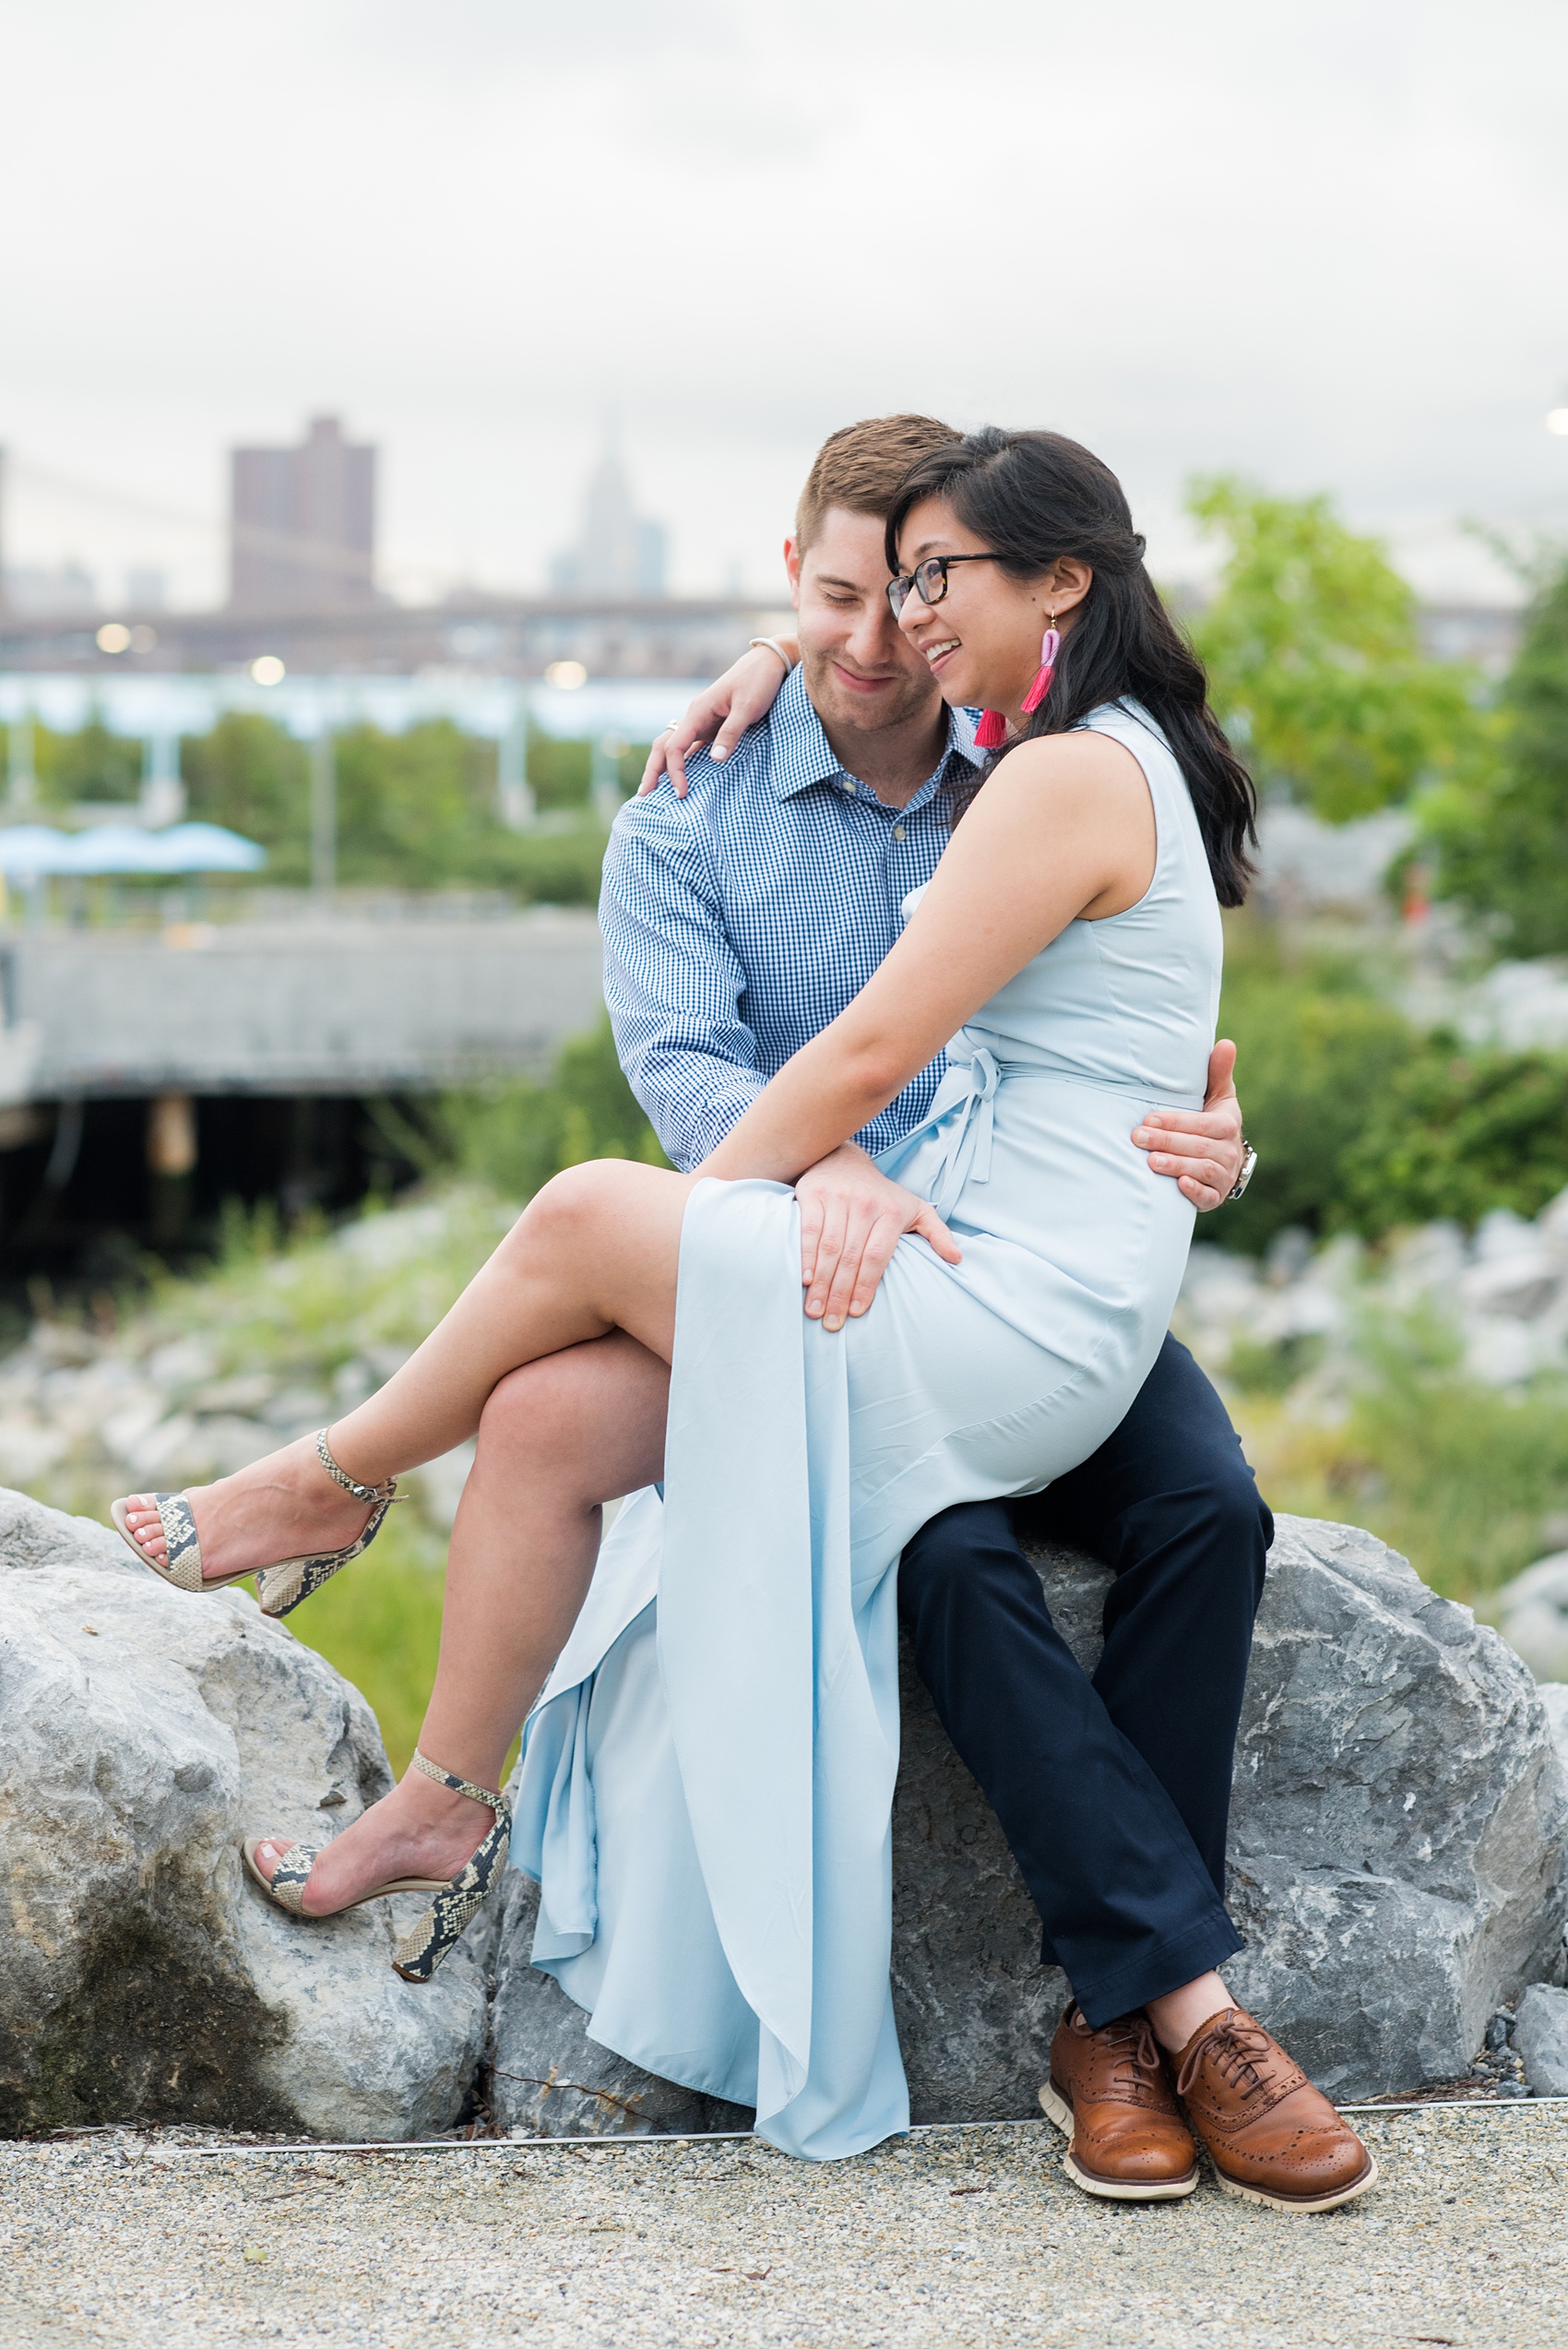 Brooklyn engagement photos by Mikkel Paige Photography. These beautiful, love-filled images in the park overlook bridges, the Manhattan skyline and waterfront on Piers 5 and 6. They'll provide inspiration from the bride and groom for outfits, romantic picture ideas and all around feel-good smiles! Click through to see their complete session post! #mikkelpaige #NYCweddingphotographer #NYCengagementsession #brooklynengagementphotos #engagementphotosinBrooklyn #BrooklynBridgePark #BrooklynPiers #ManhattanSkyline #BrooklynBridge #cityengagementphotos